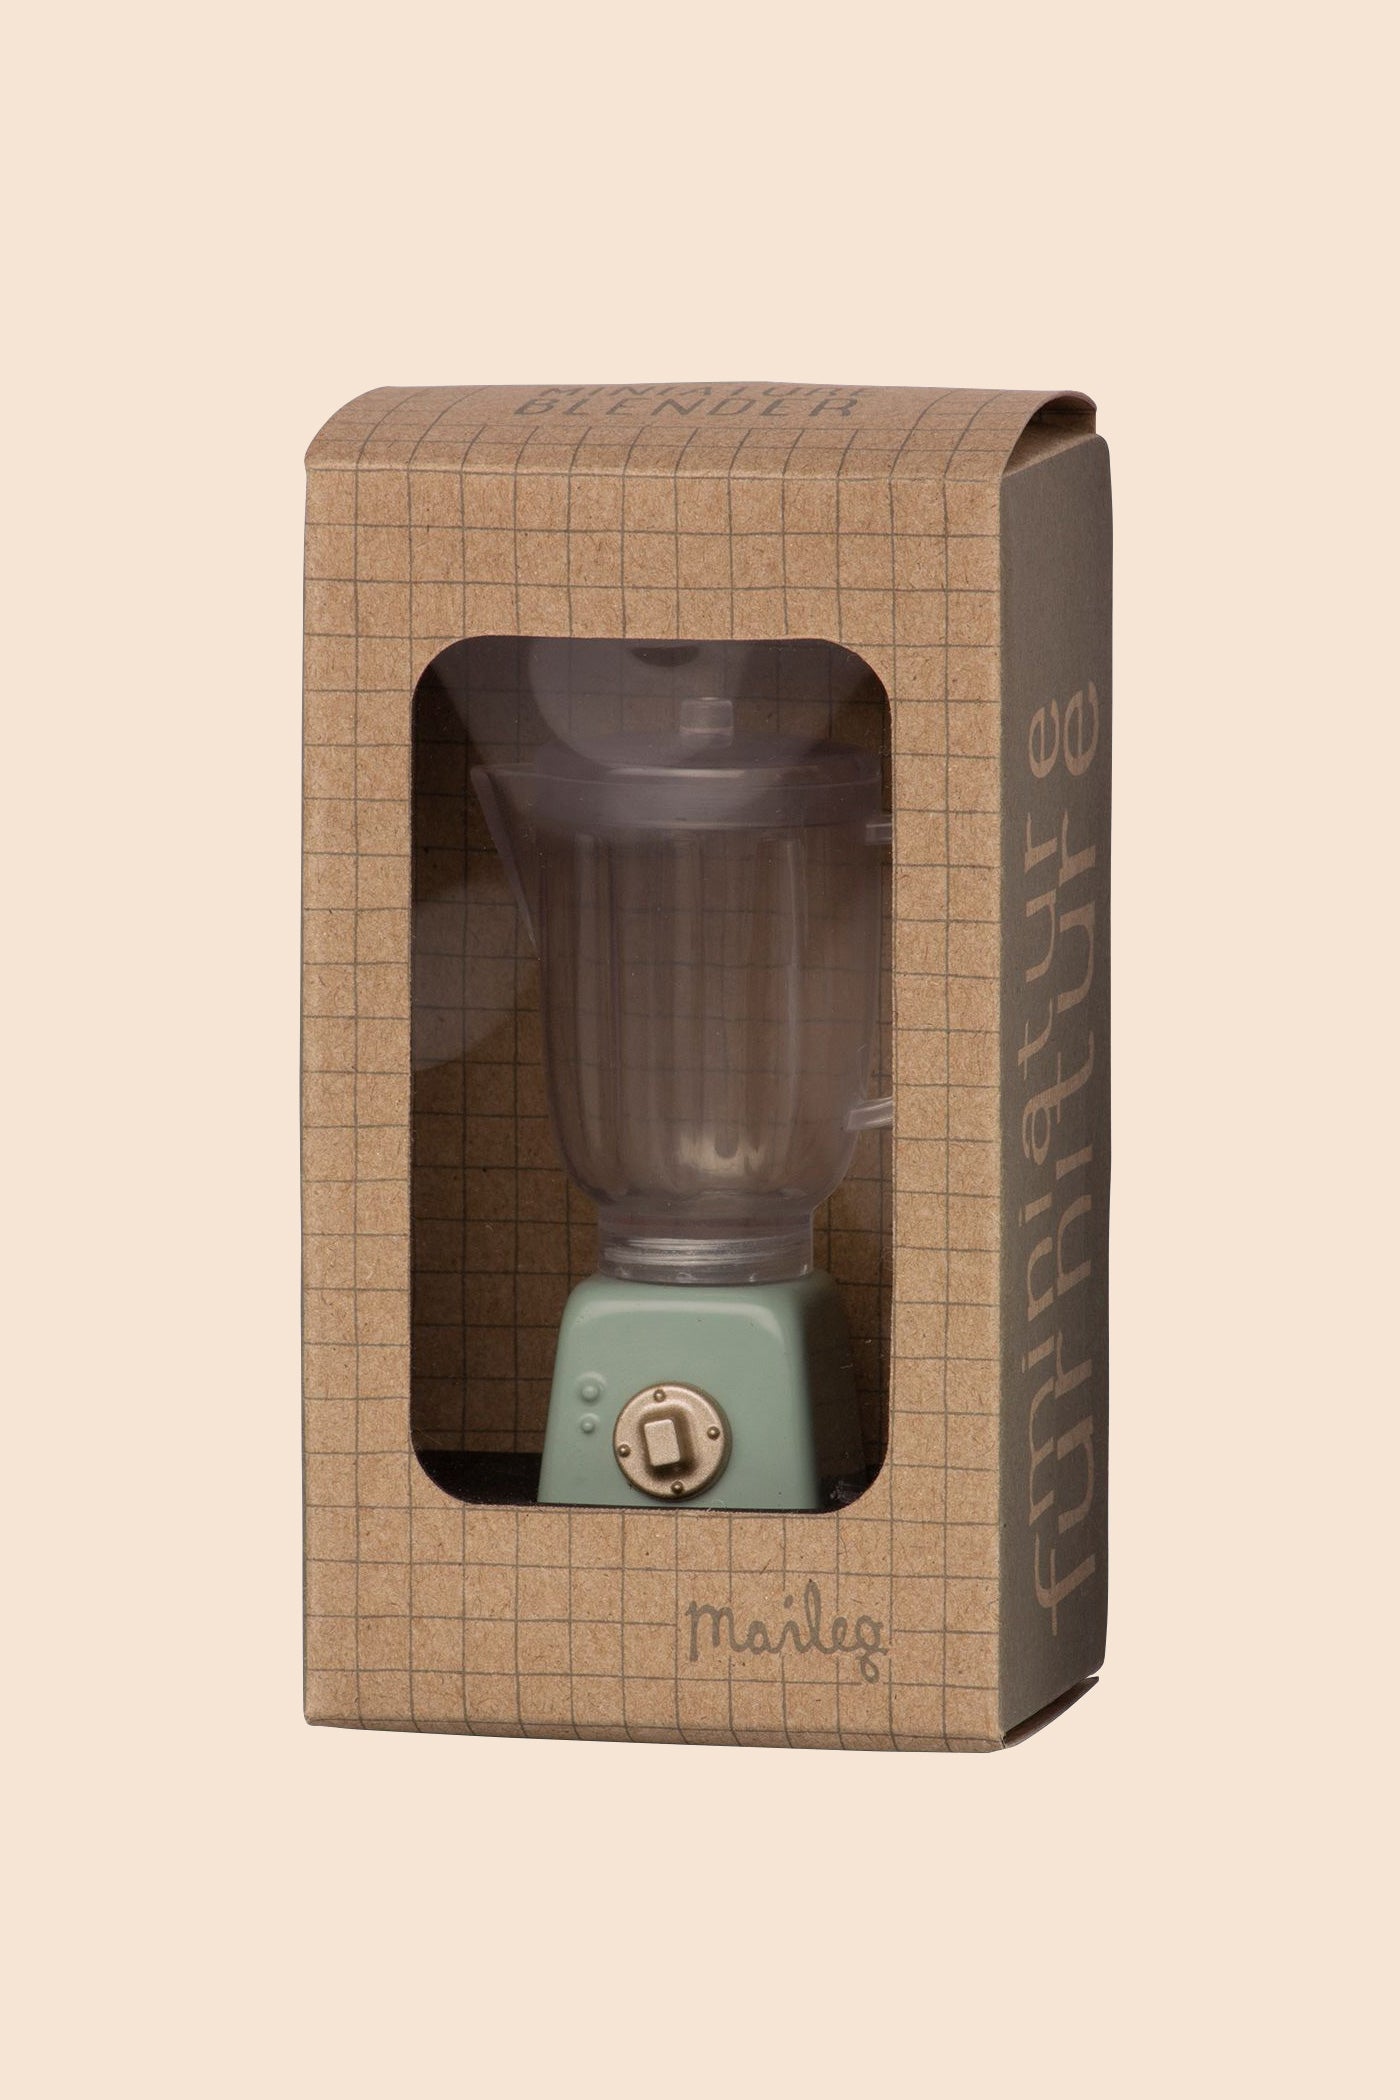 Maileg - Thermos and Cups - Mint